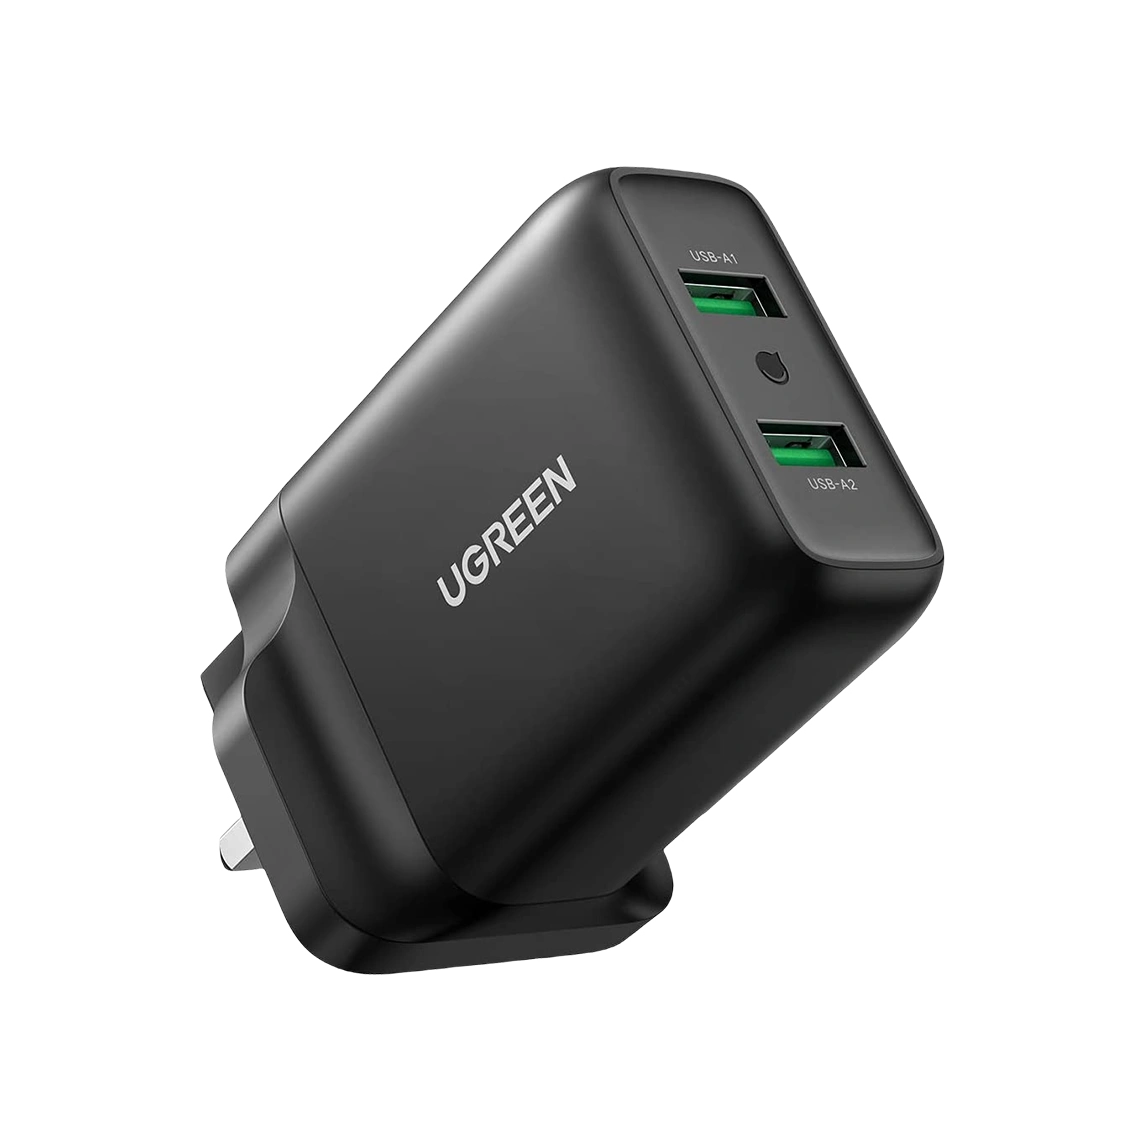 ugreen-usb-charger-36w-qc-3-0-quick-wall-charger-adapter-2-port-usb-travel-70164